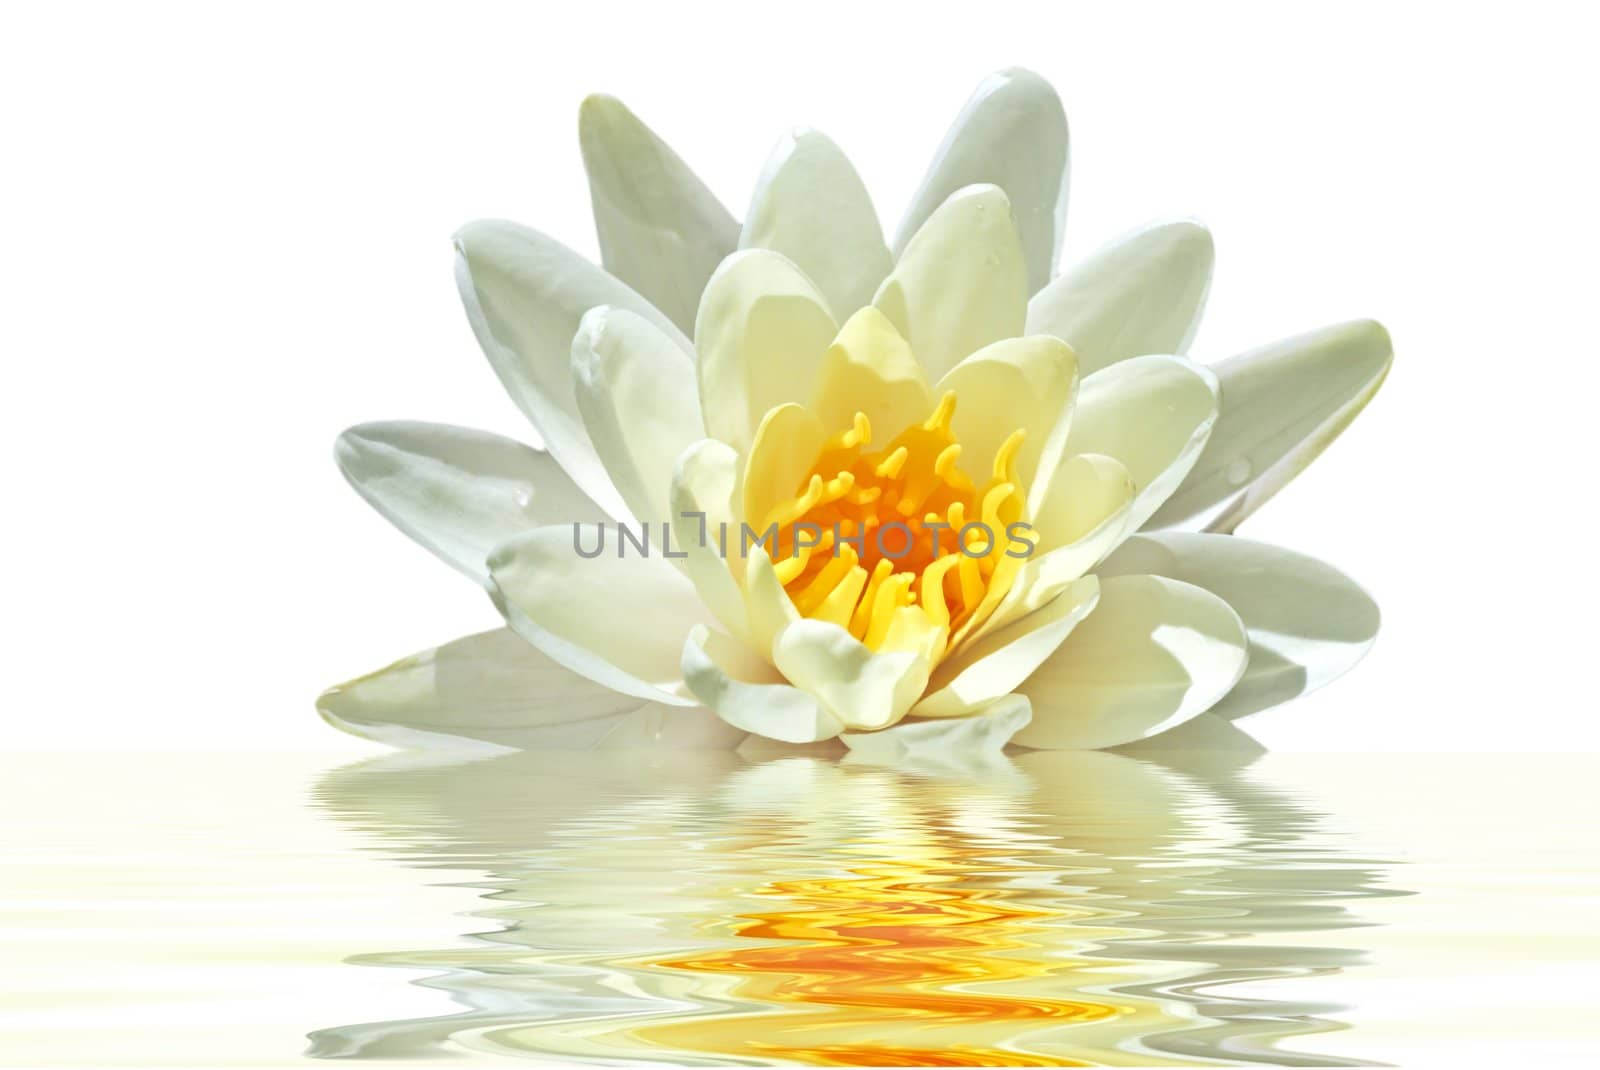 White Lotus flower floating on water by devy